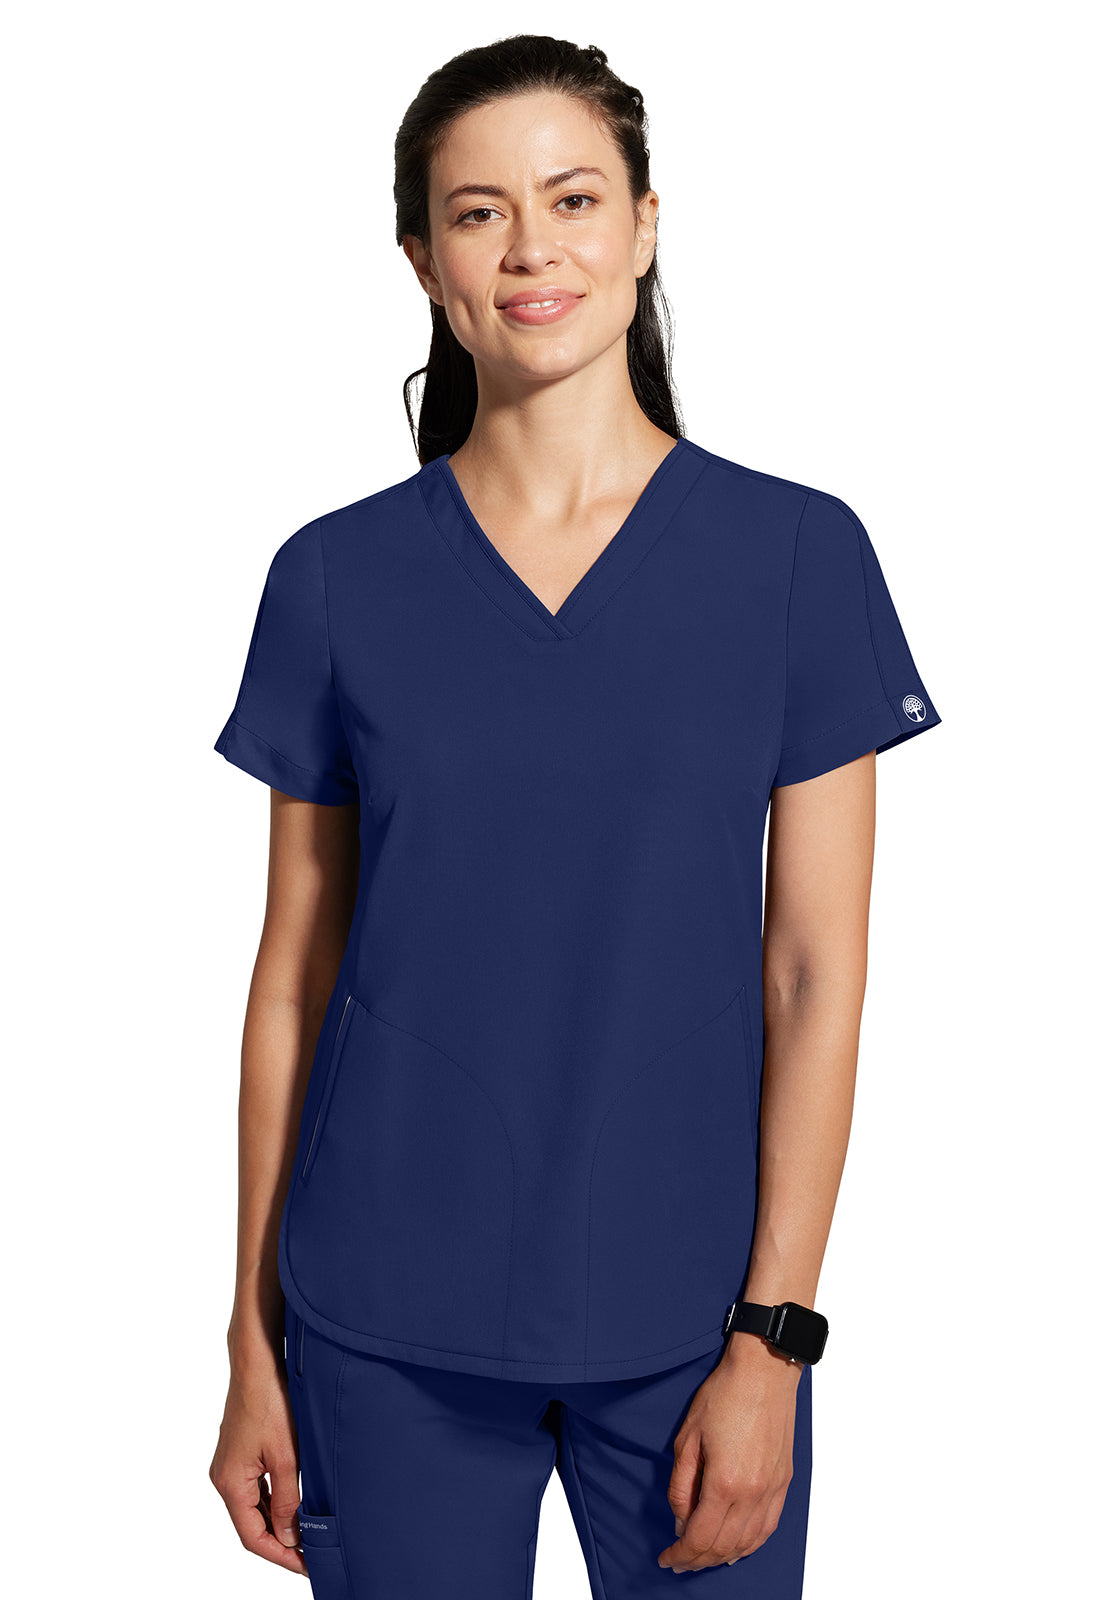 Healing Hands 360 Carly V-Neck 2285 Women's Top – Valley West Uniforms